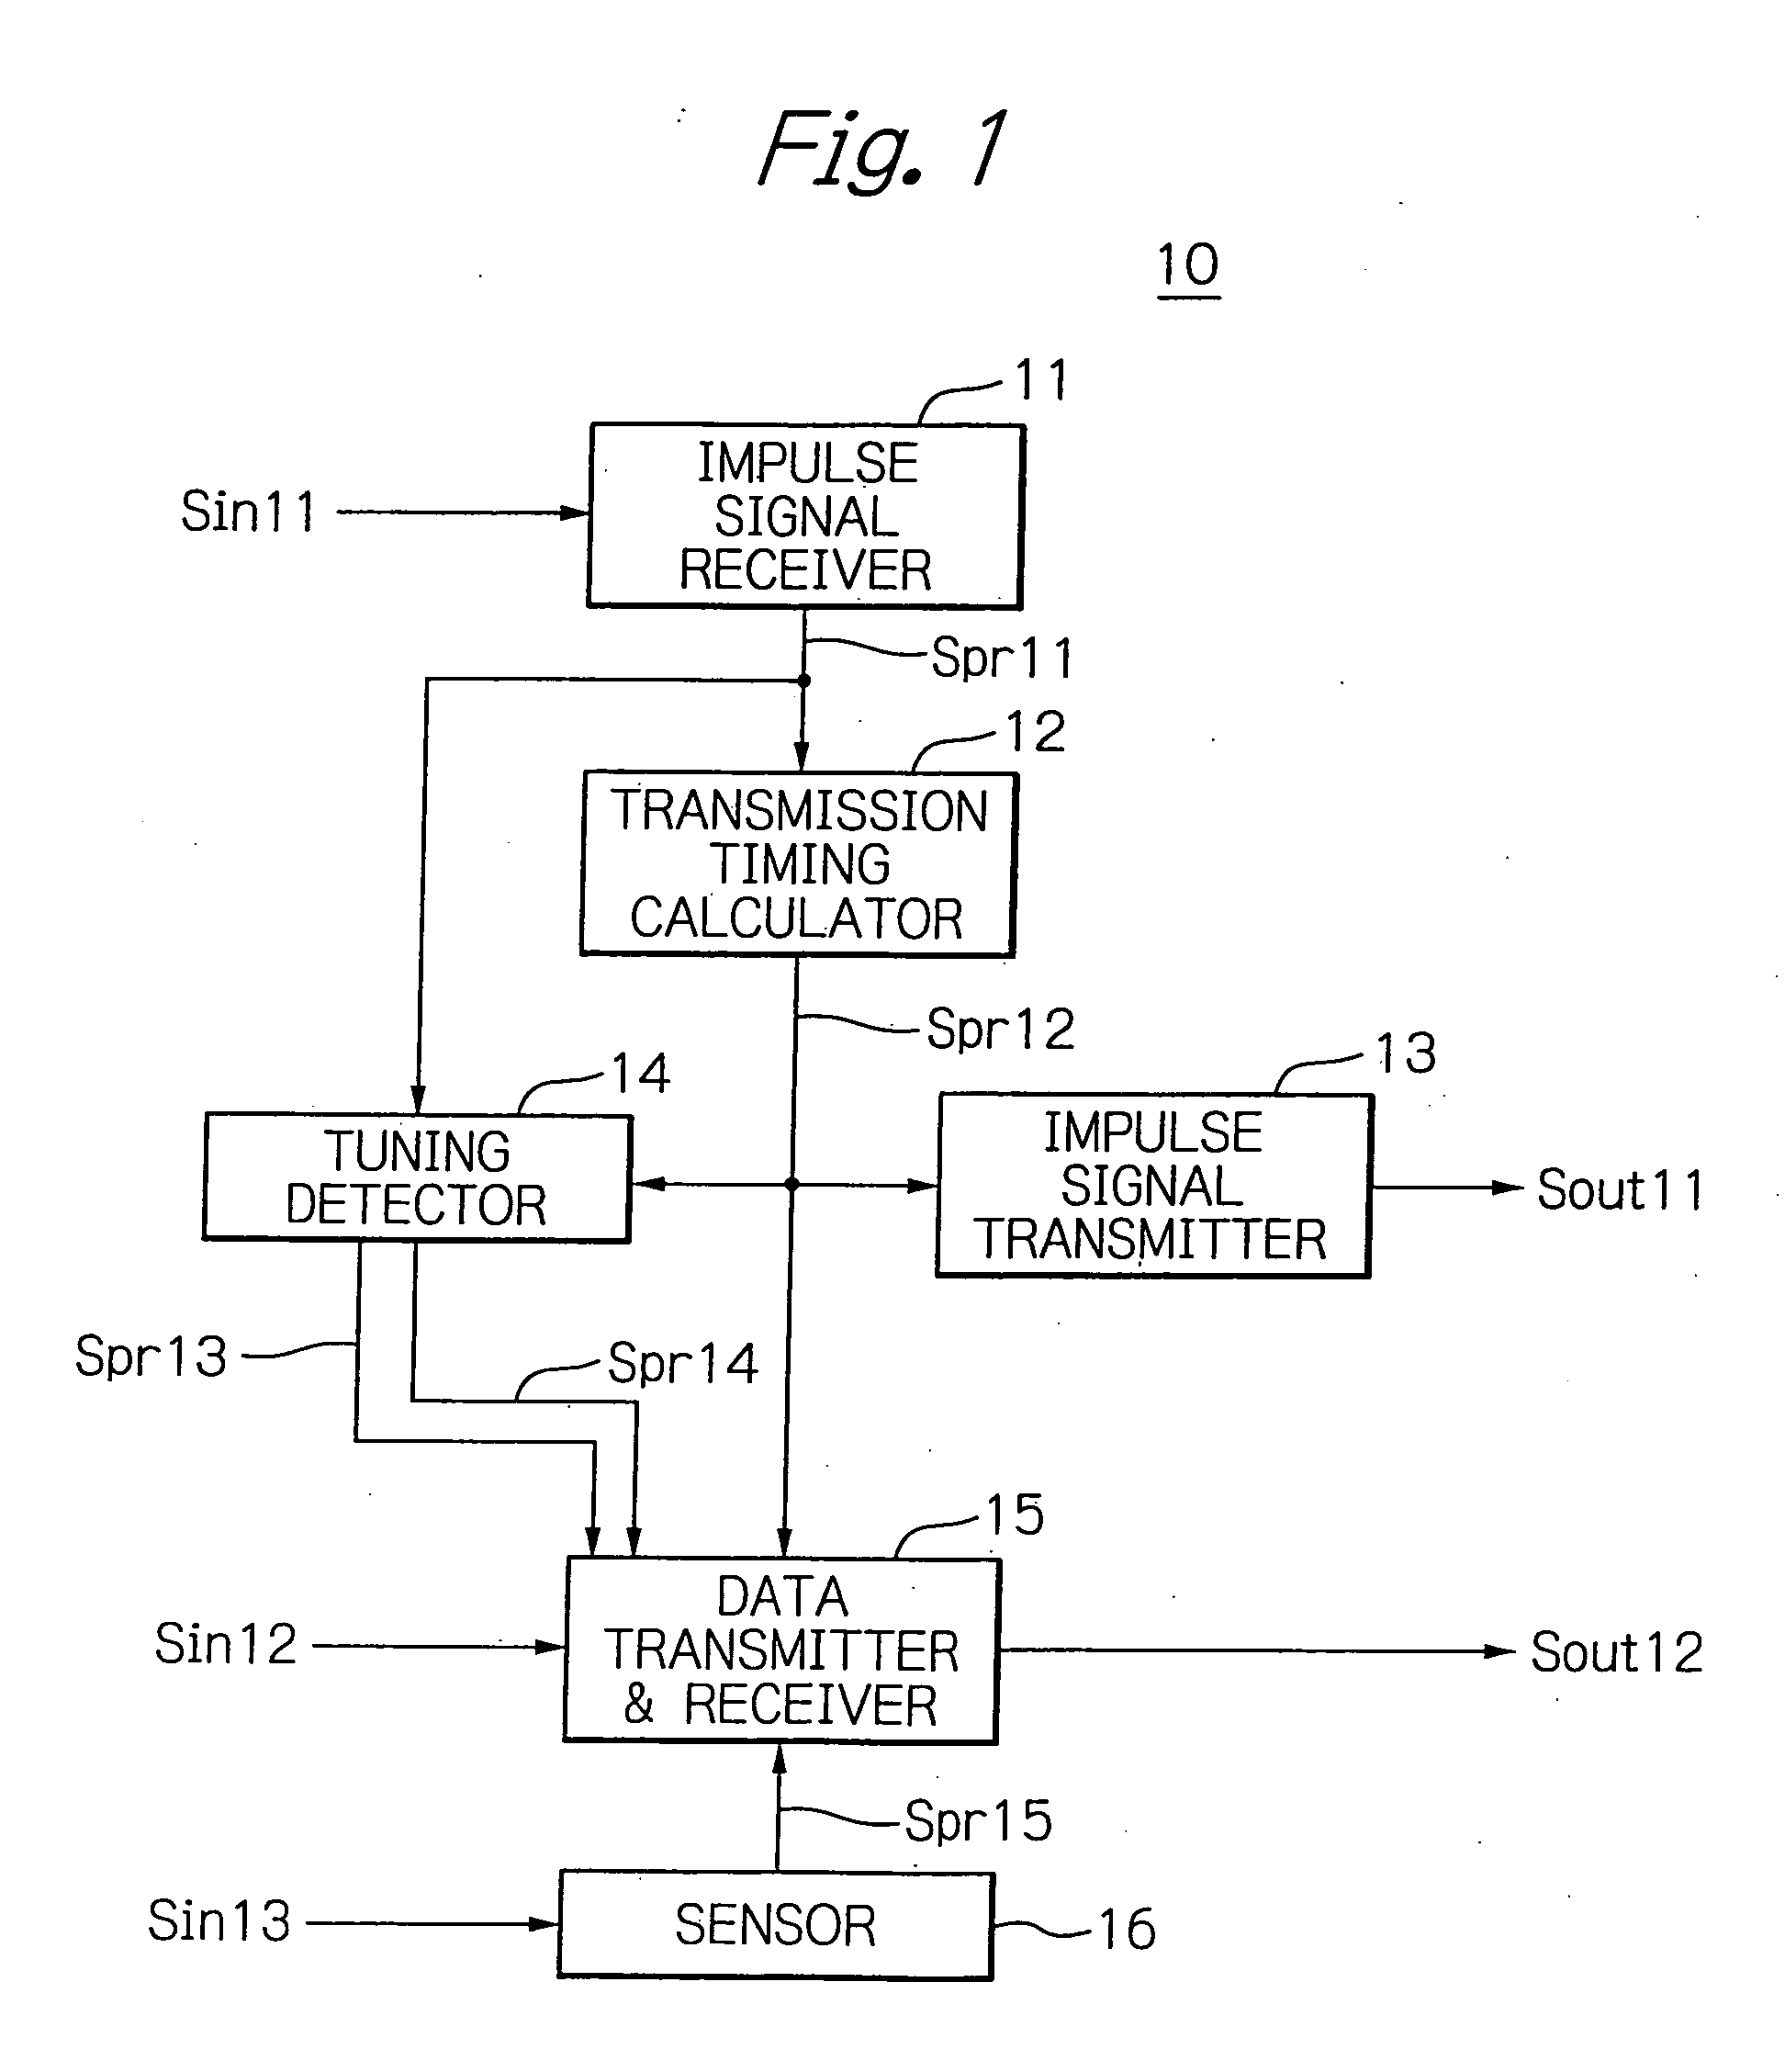 Apparatus for controlling data transmission timing responsively to a calculated collision ratio